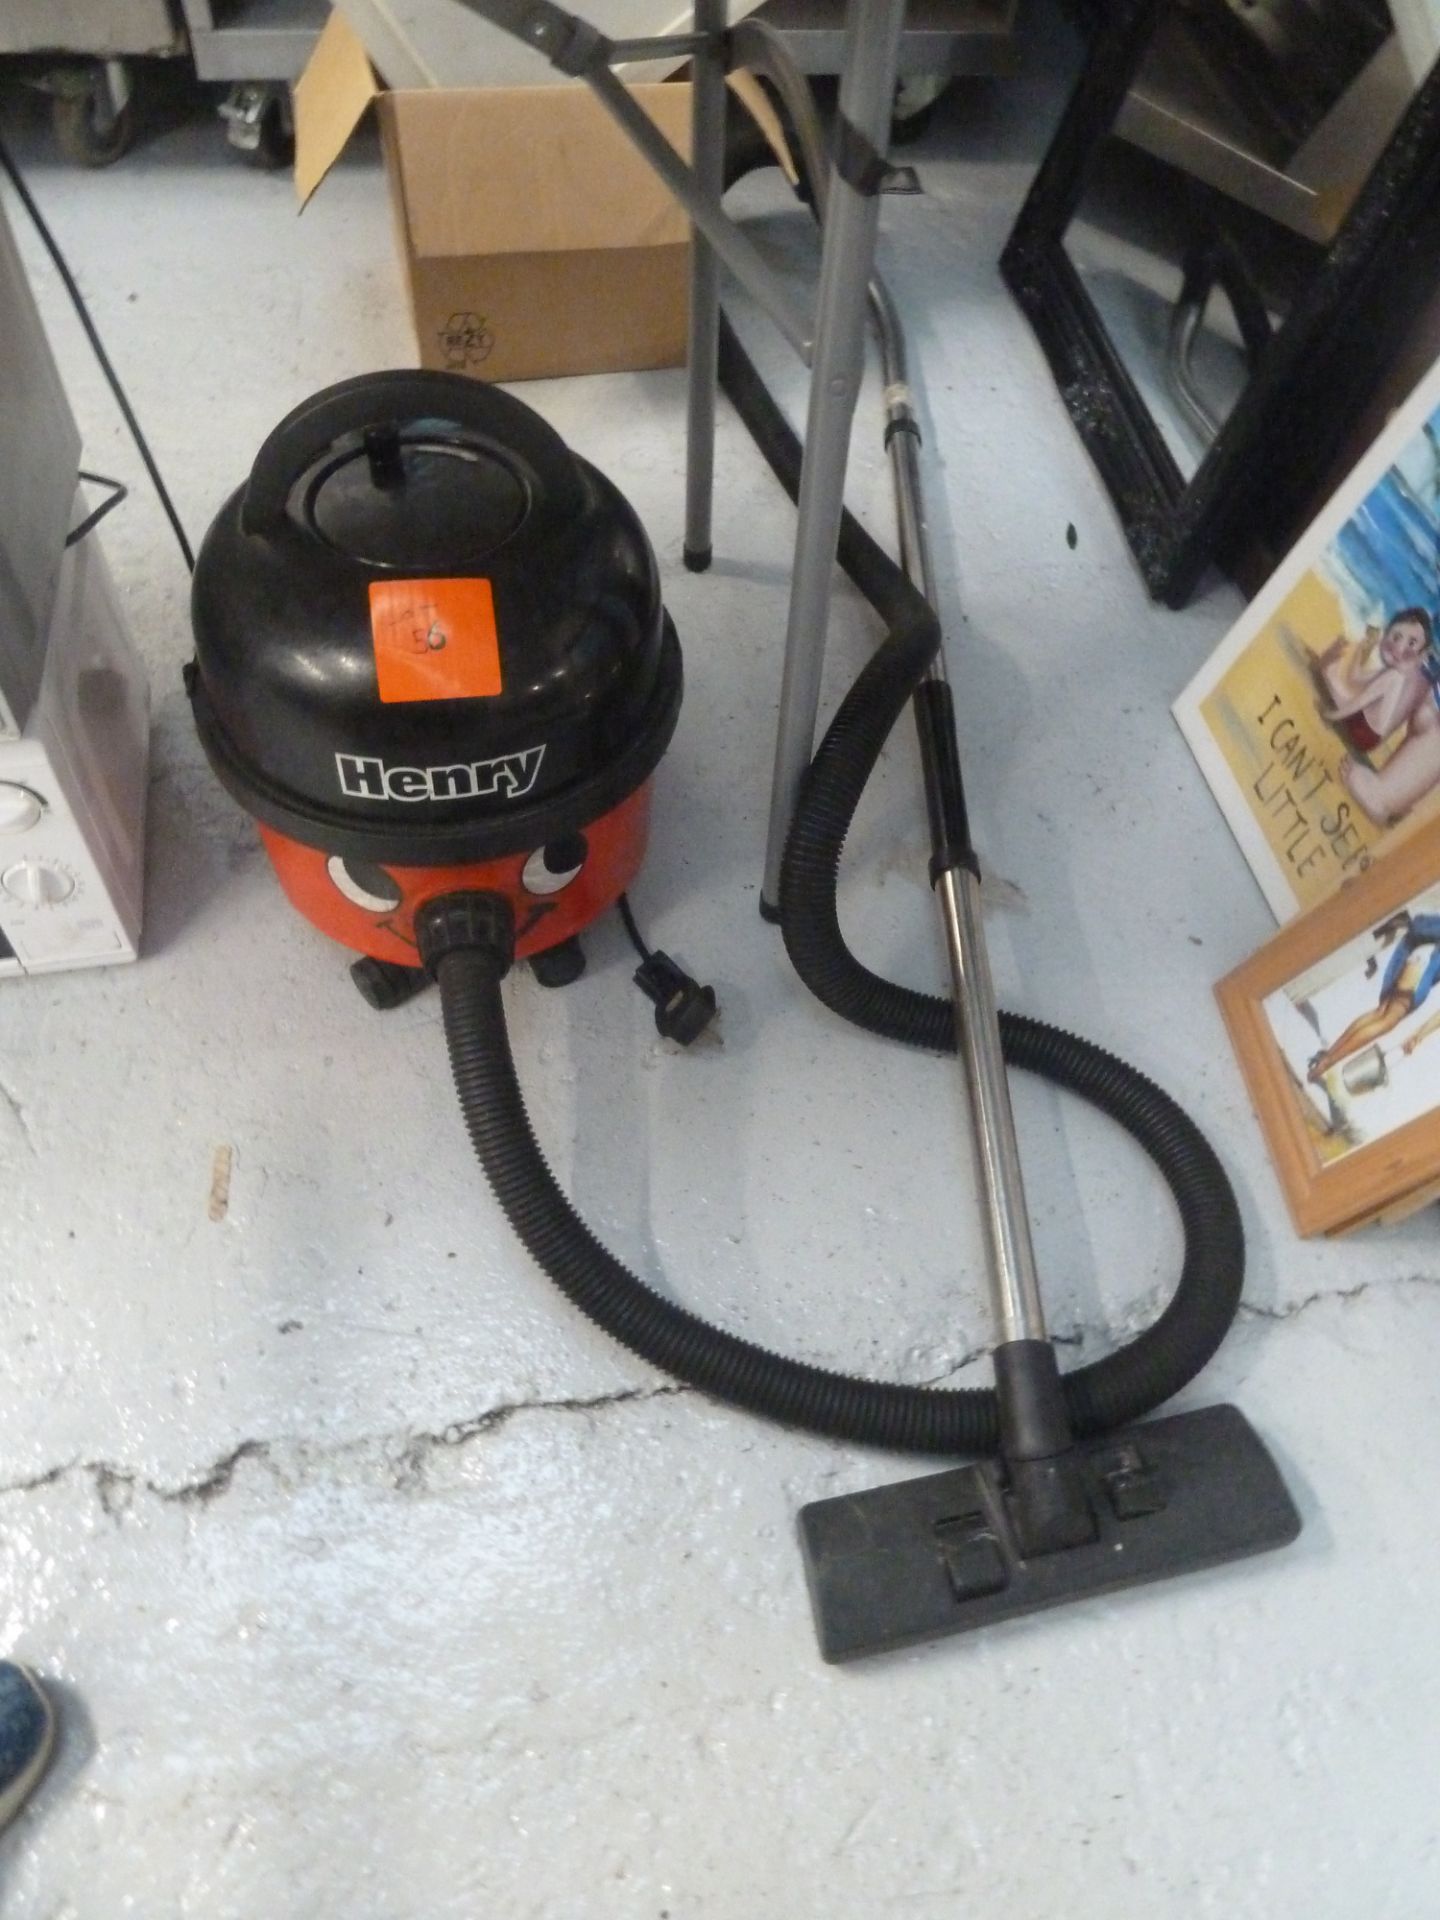 * Henry Hoover, working condition